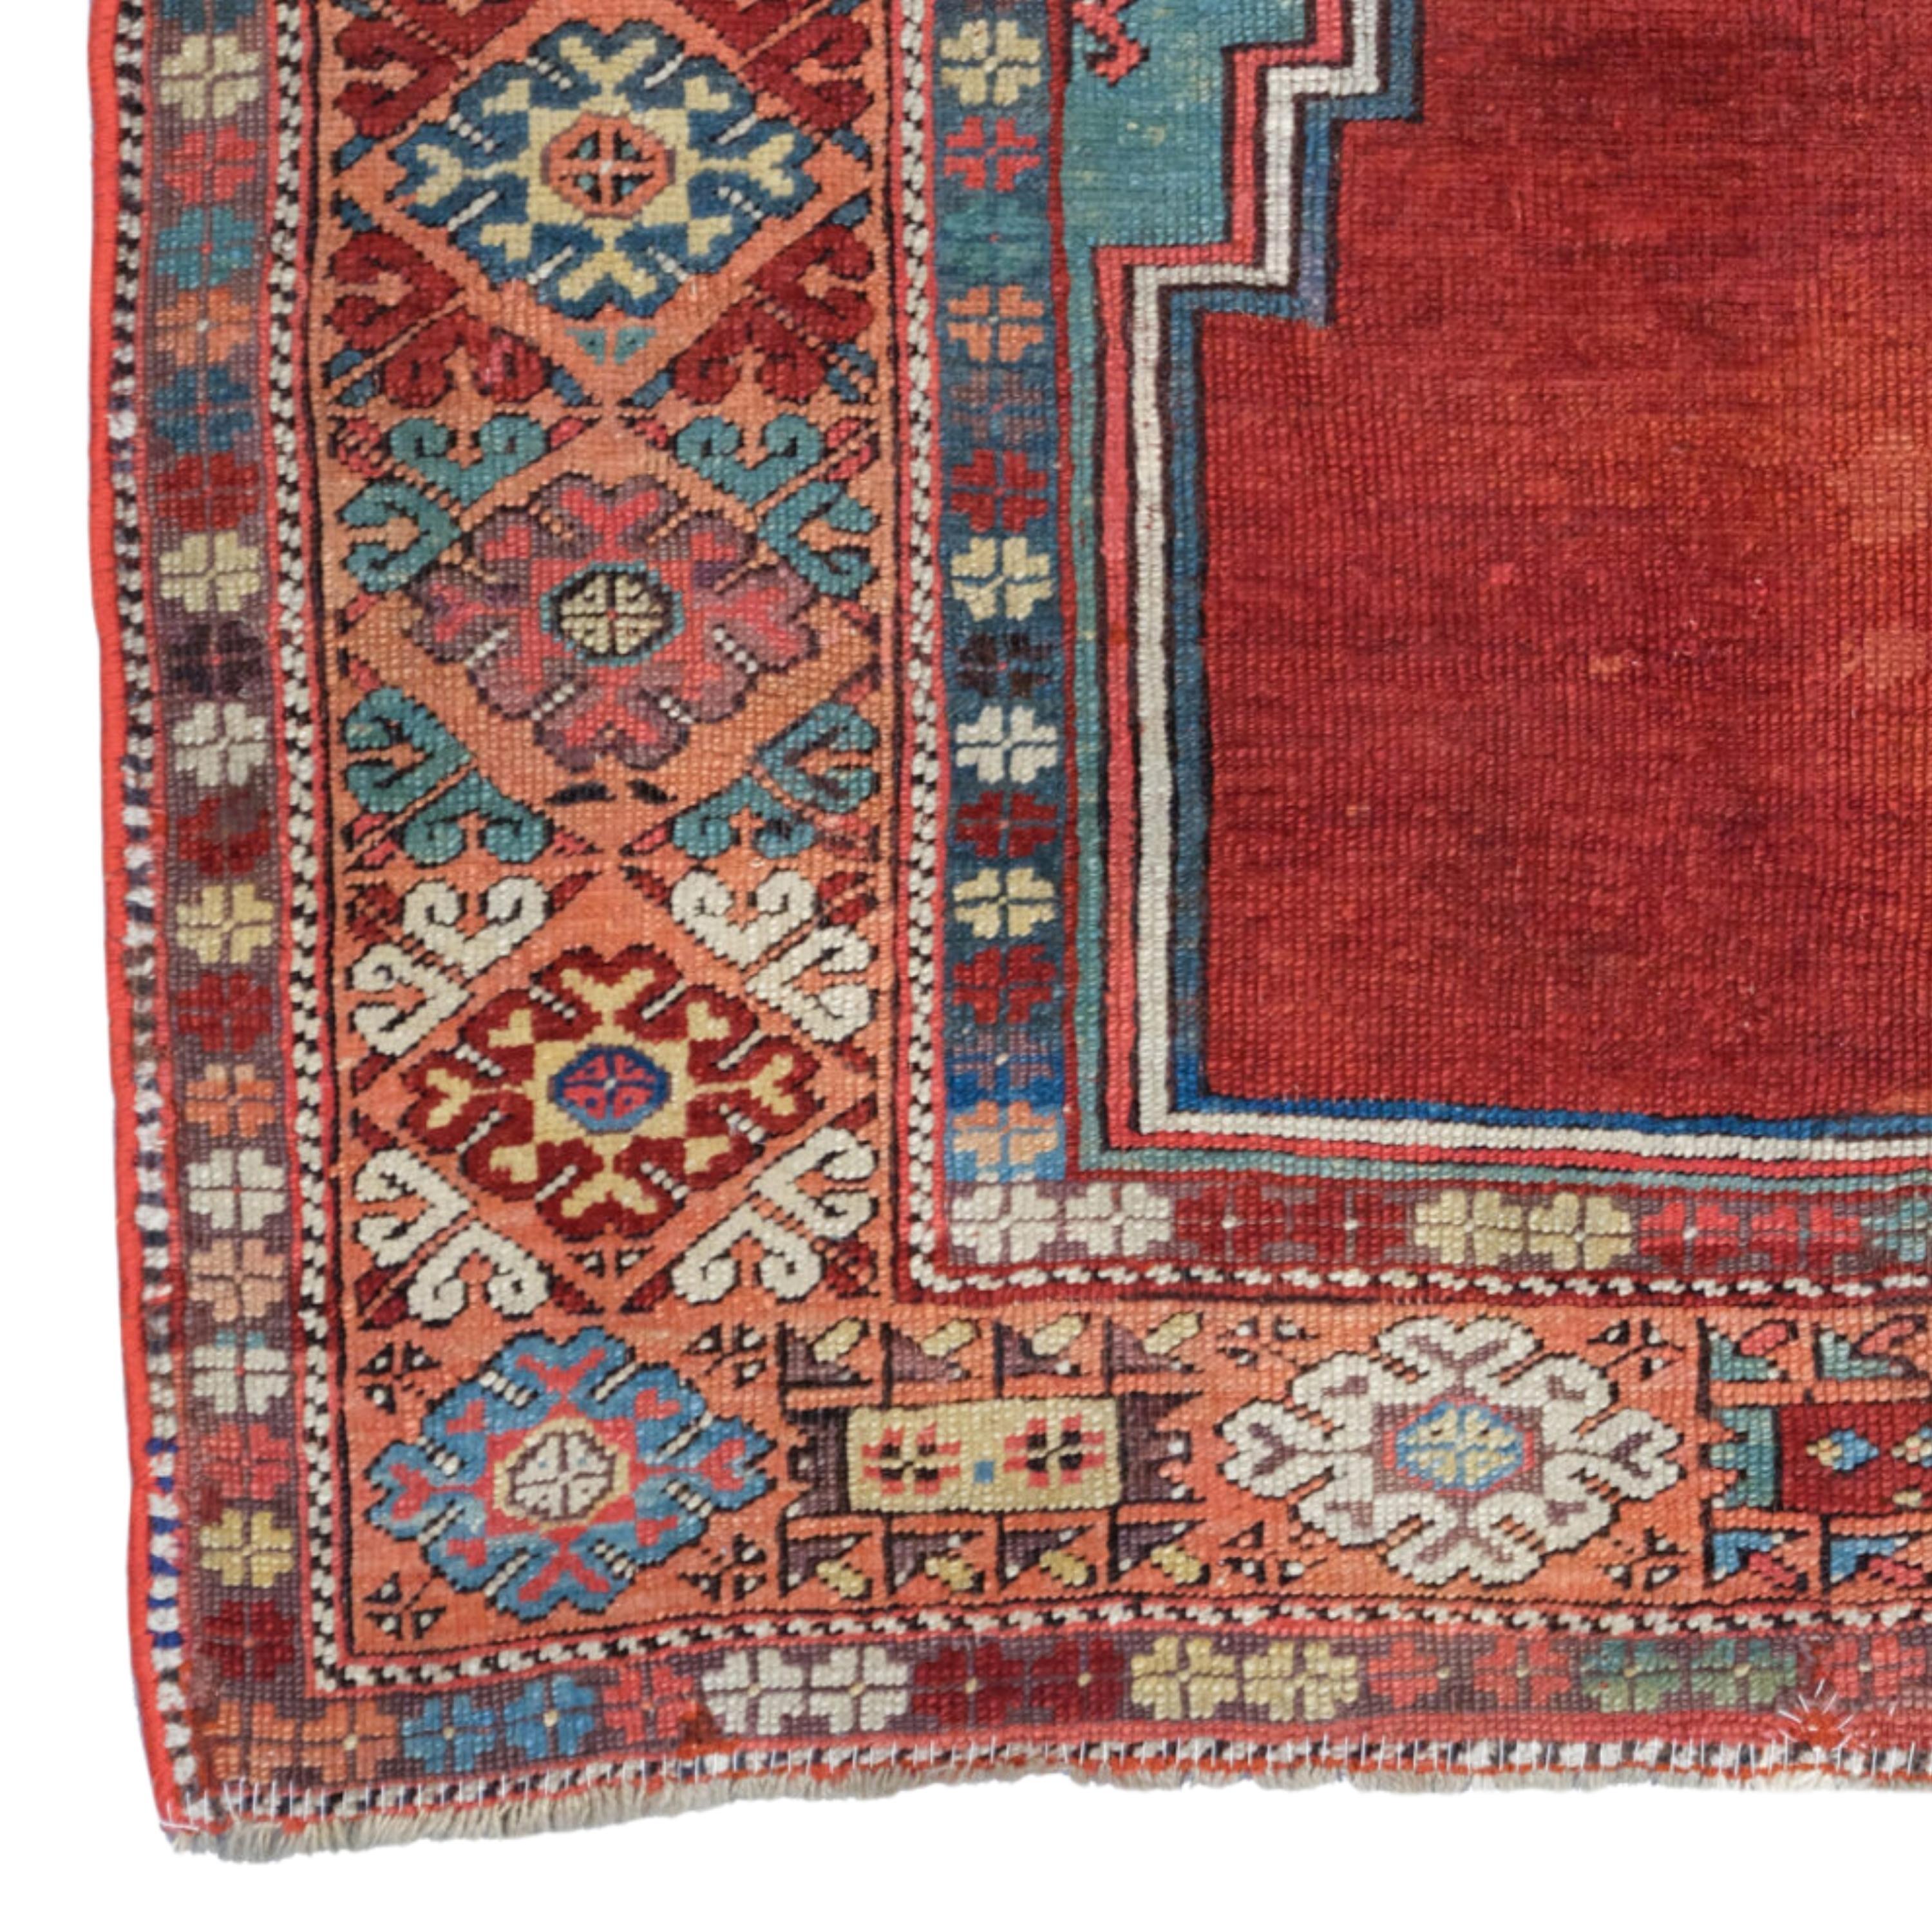 Antique Konya Prayer Rug  Anatolian Rugs
Middle of the 19th Century Central Anatolian Konya Prayer Rug
Size : 120×132 cm (47,2x51,9 In)

Would you like to add a historical touch to your home or office? Then, this Antique Anatolian Konya carpet from